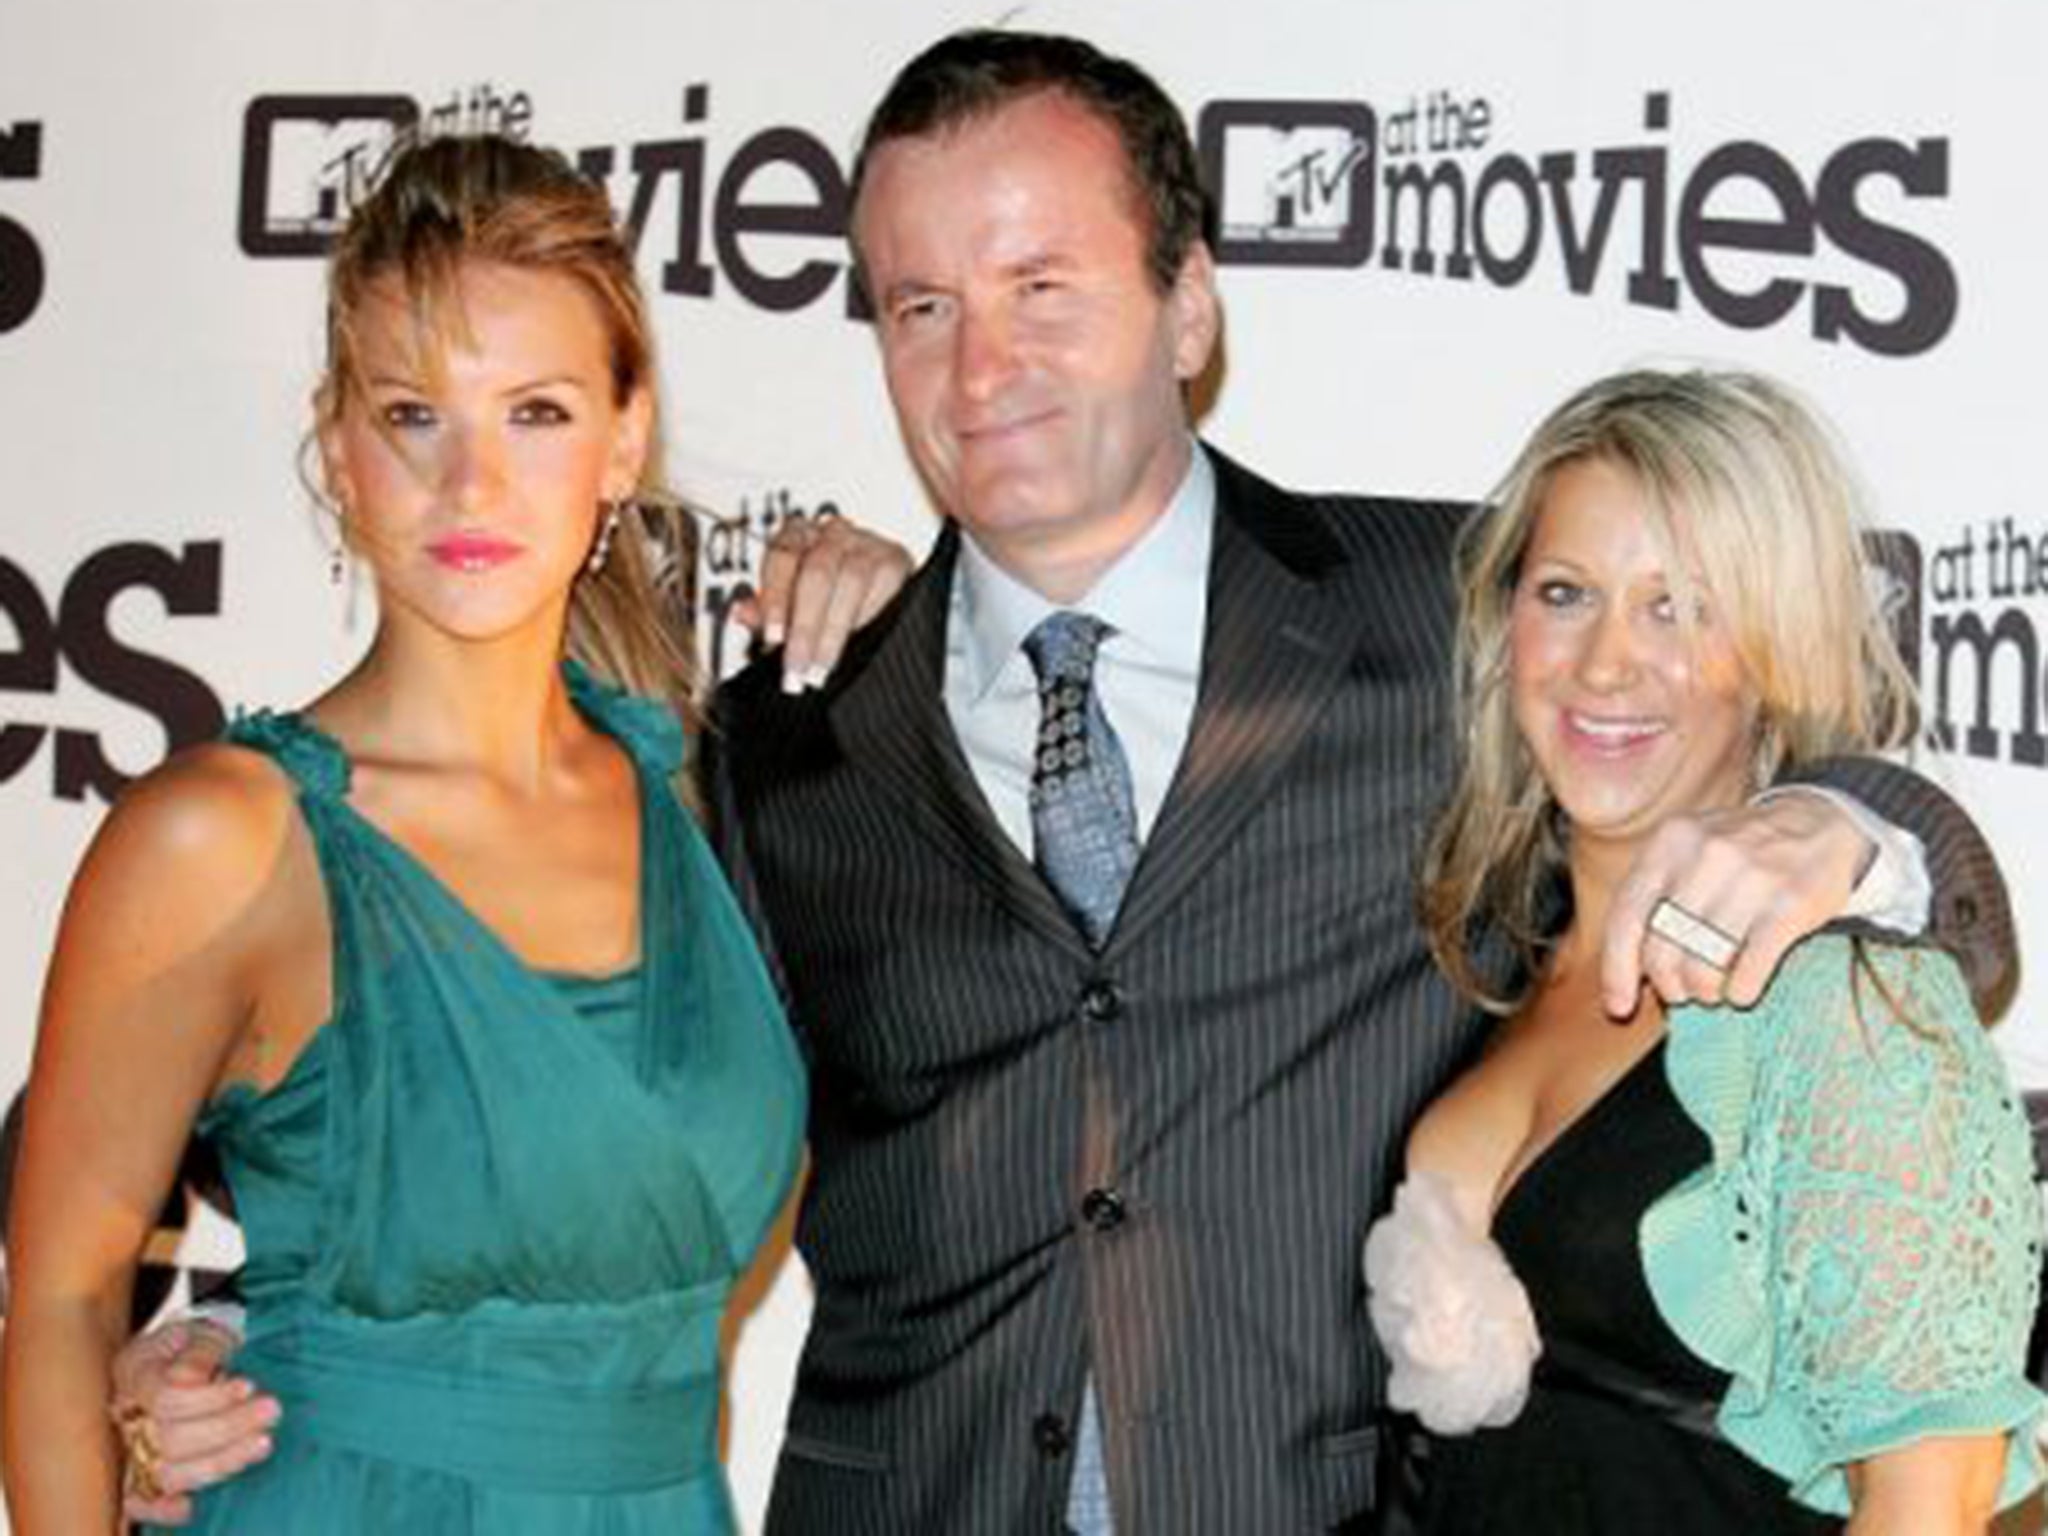 Dave Ulliott with guests attending the MTV party during the 59th International Cannes Film Festival in 2006 (Getty)